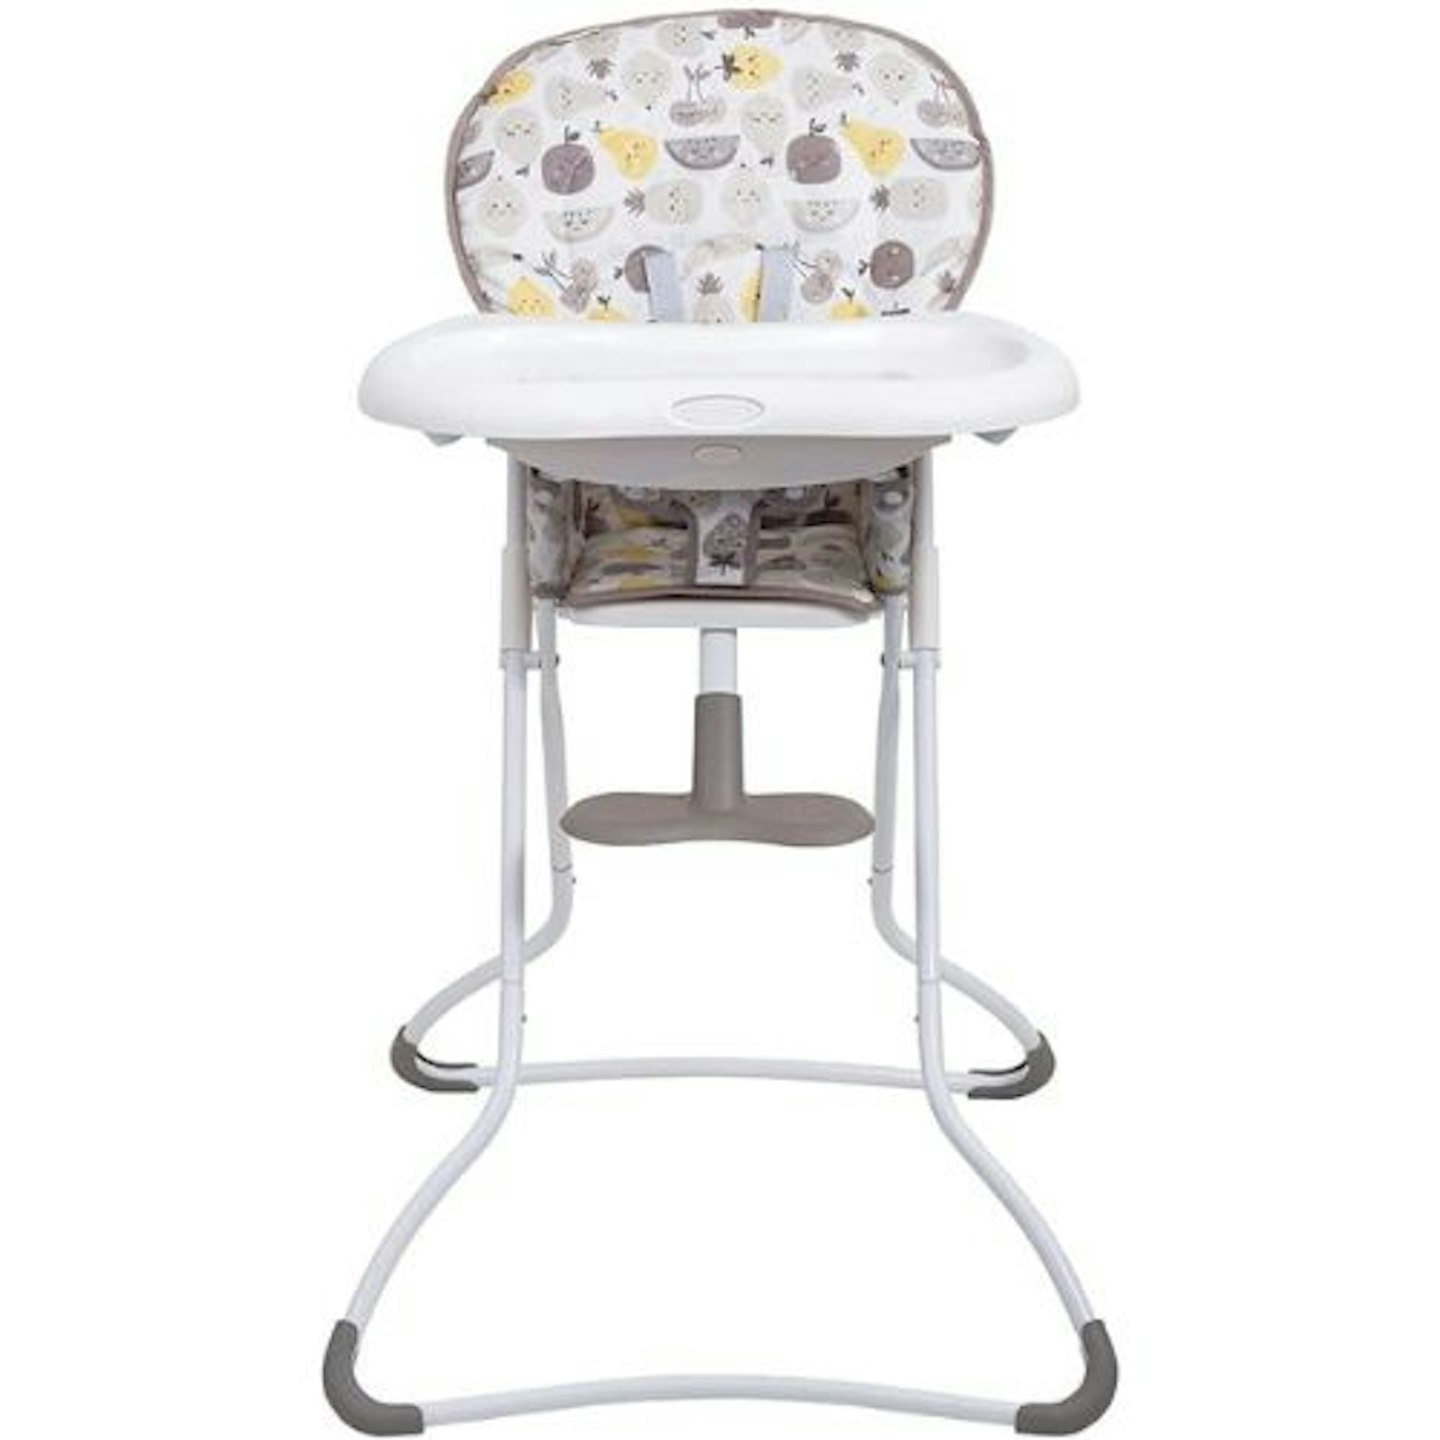 Graco Snack N’ Stow Compact Highchair